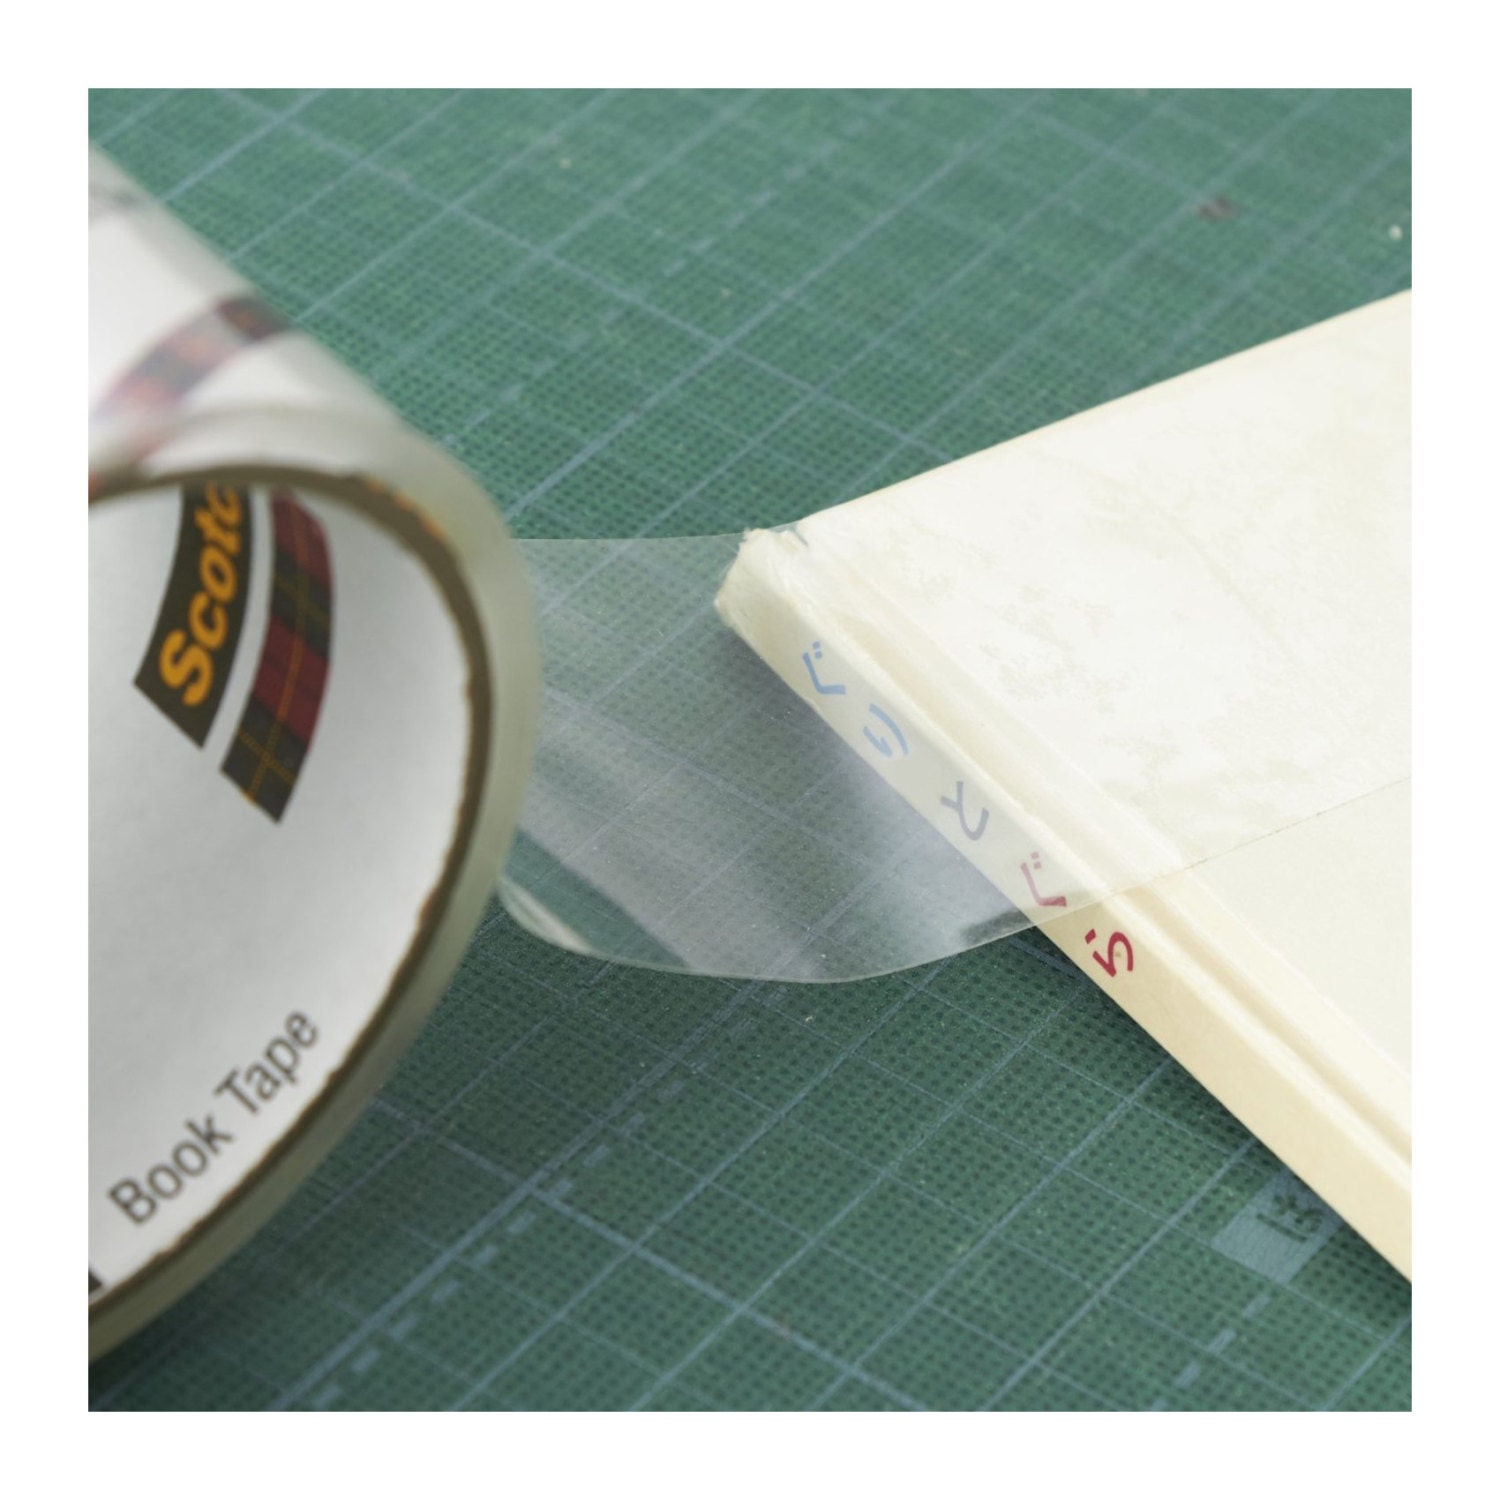  Scotch Book Tape, 1.5 in x 540 in, 1 Roll/Pack, Excellent for  Repairing, Reinforcing Protecting, and Covering (845-150) : Bookbinding  Tapes : Office Products